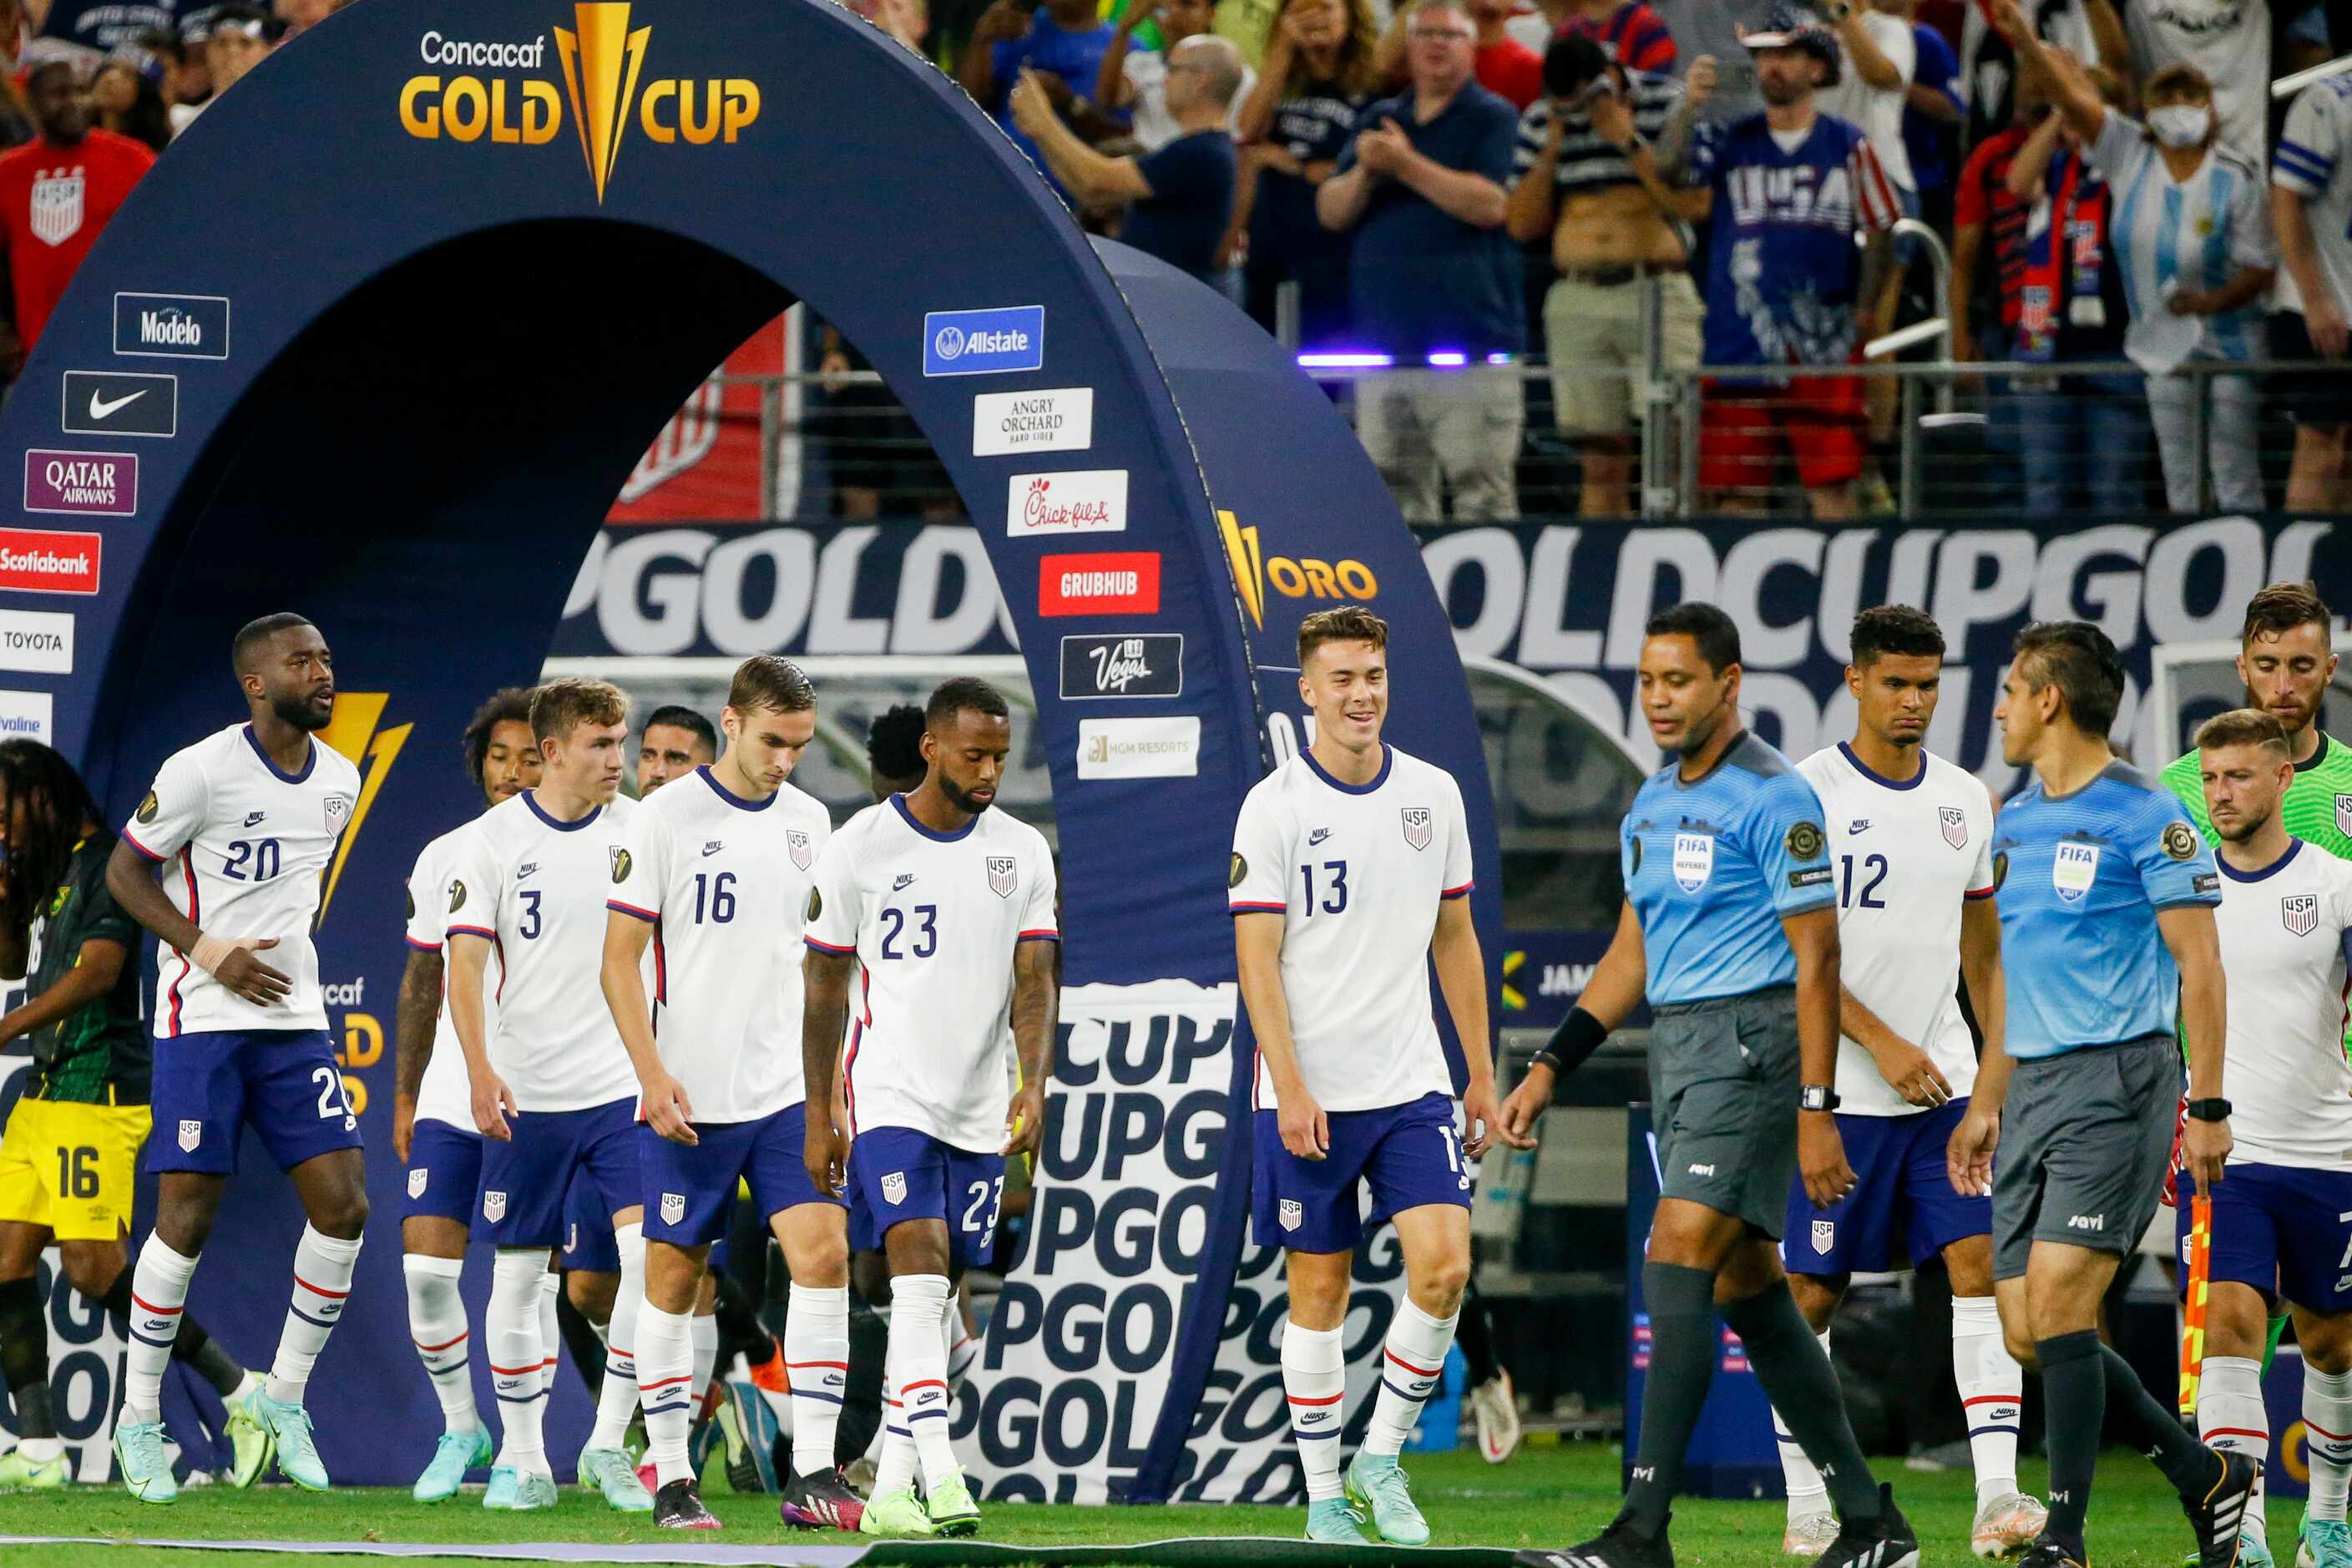 The USA men’s national team enters the field before a CONCACAF Gold Cup quarterfinal soccer...